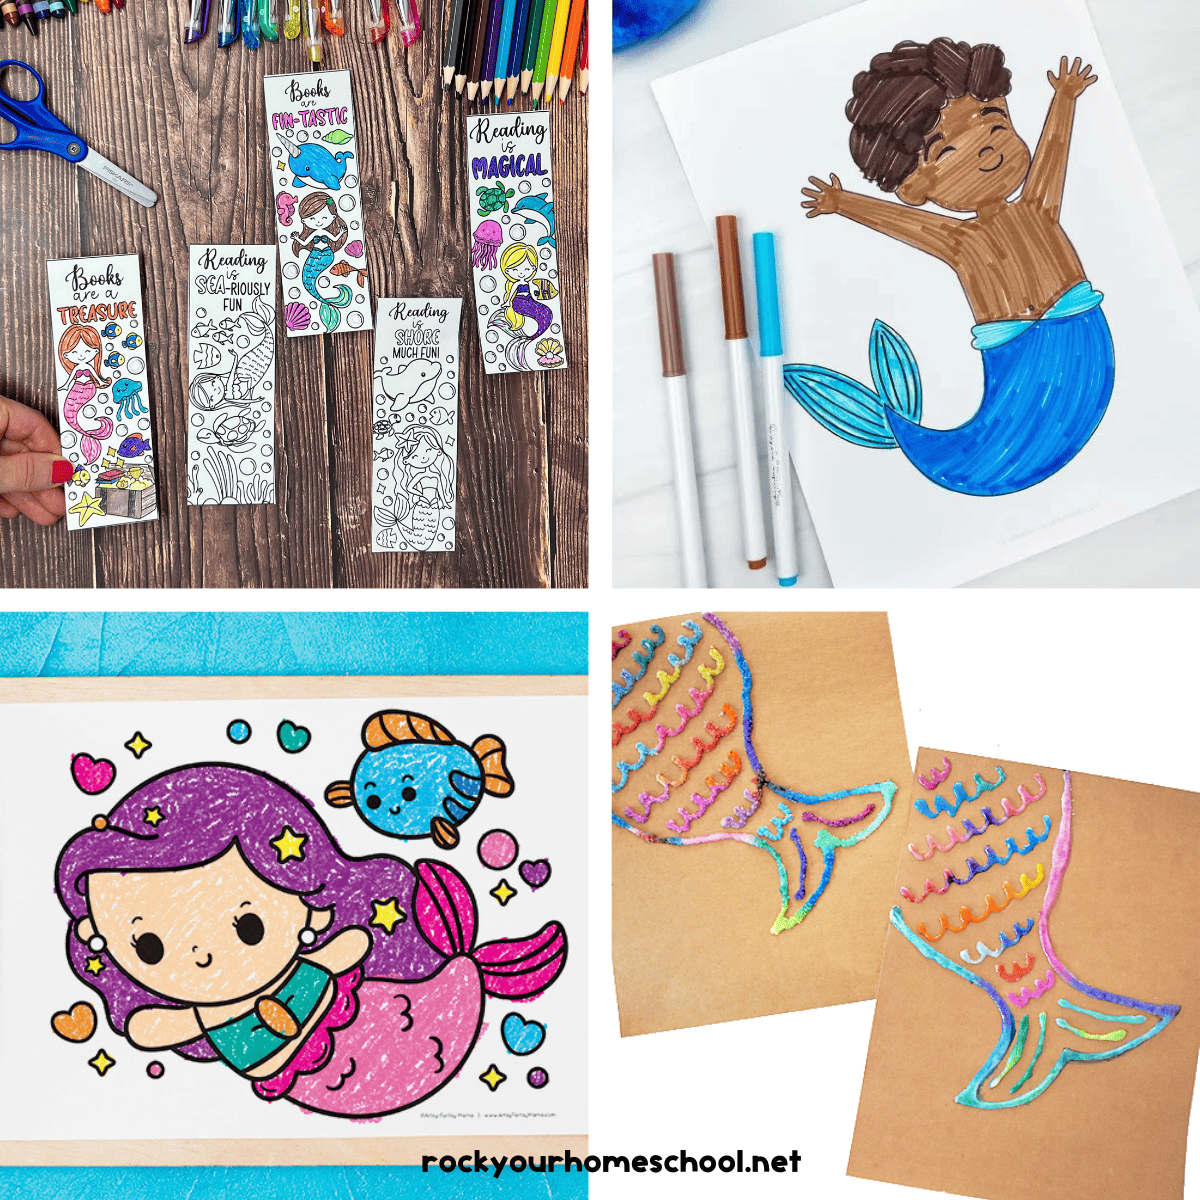 Four free mermaid printables for kids including bookmarks, coloring pages, and painting templates.